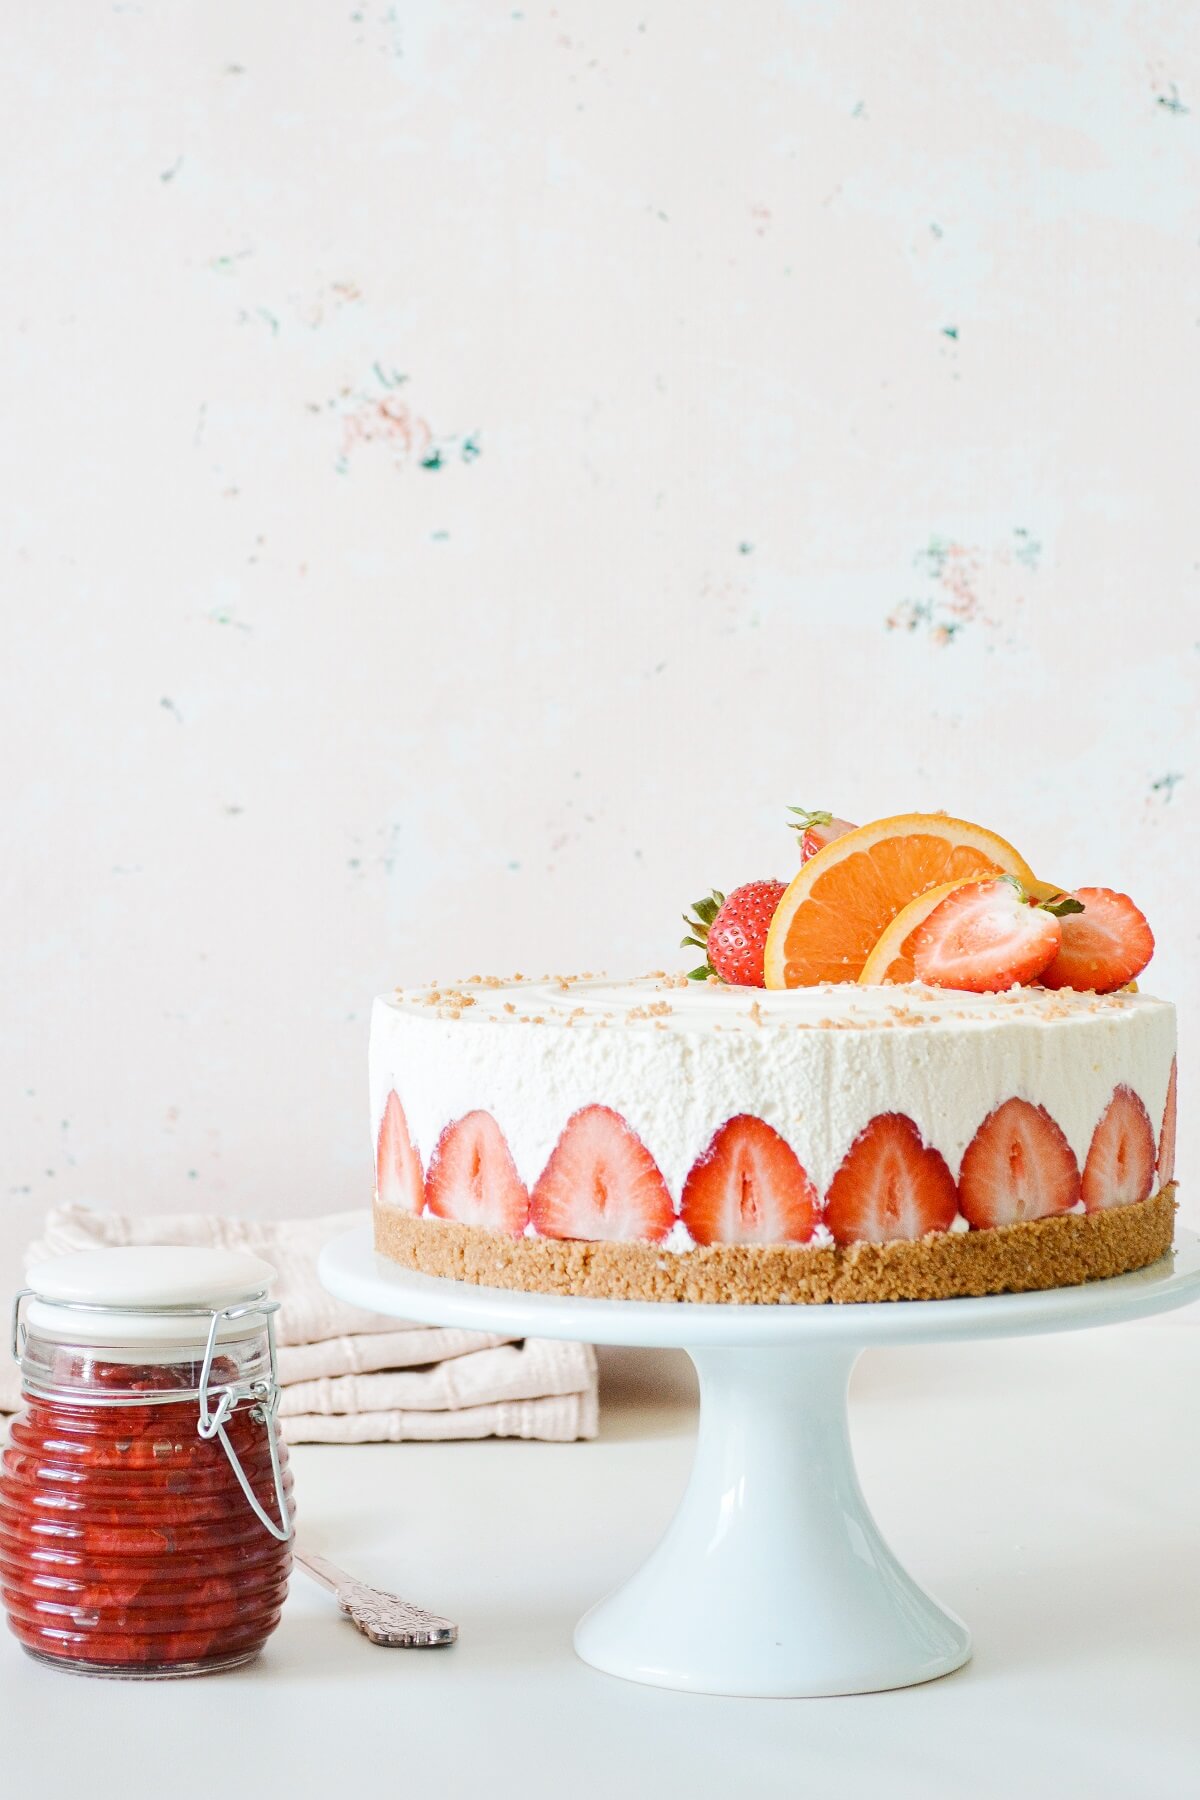 Strawberry orange cheesecake, lined with sliced strawberries, next to a jar of strawberry sauce.